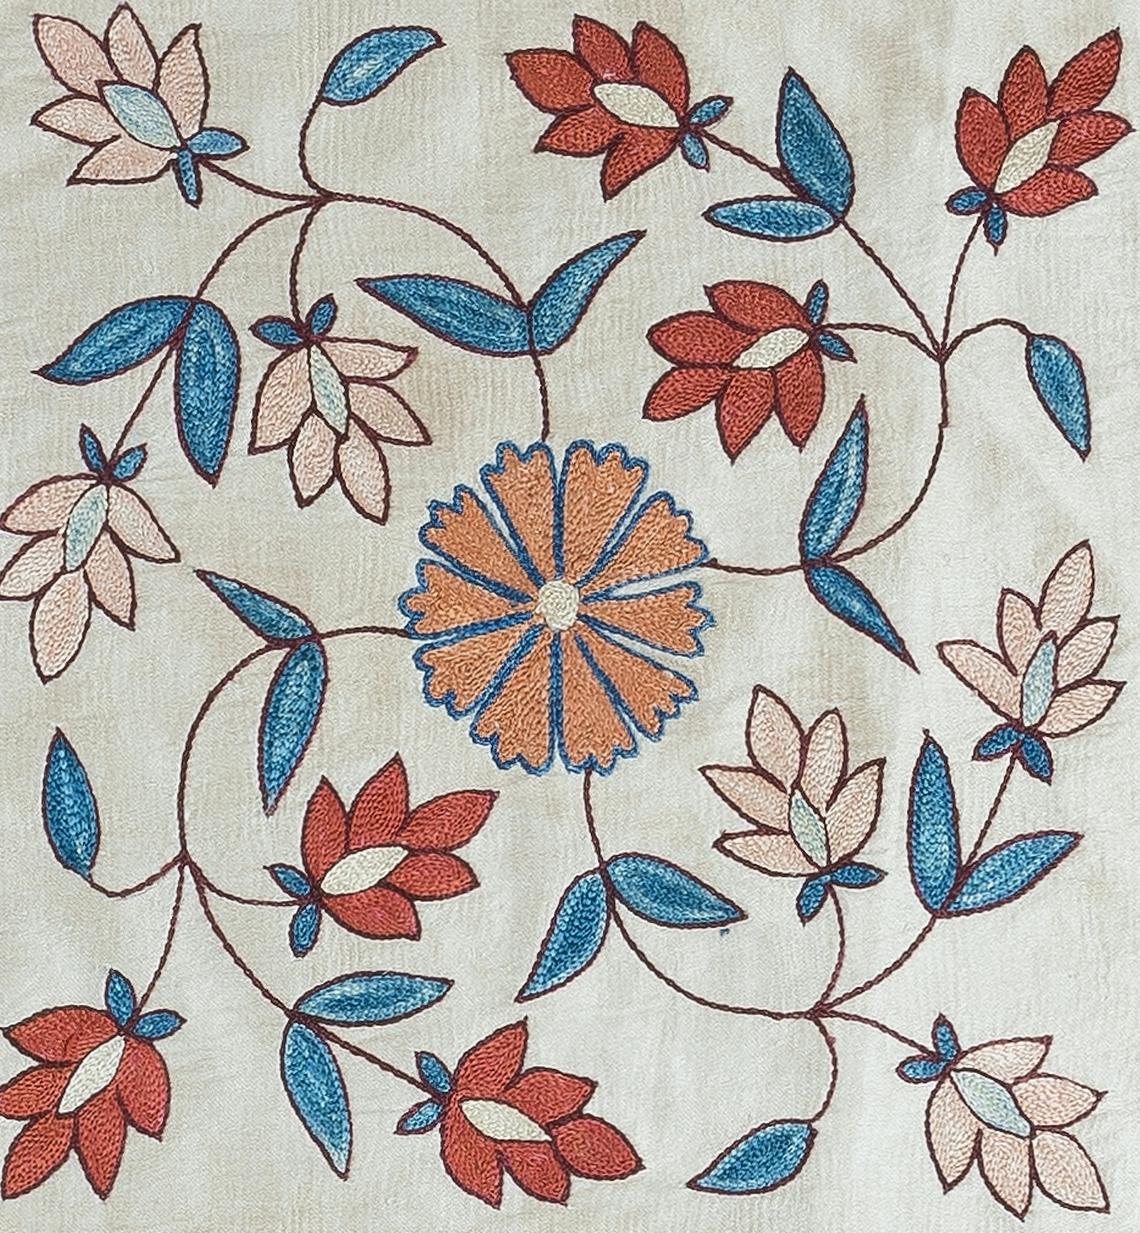 Decorative suzani cushion cover made of hand embroidery silk on silk background, flowers and vine motifs, linen backing with zipper, no insert.

Delicate and specialised washing advised.

Suzani is a type of hand-embroidered and decorative